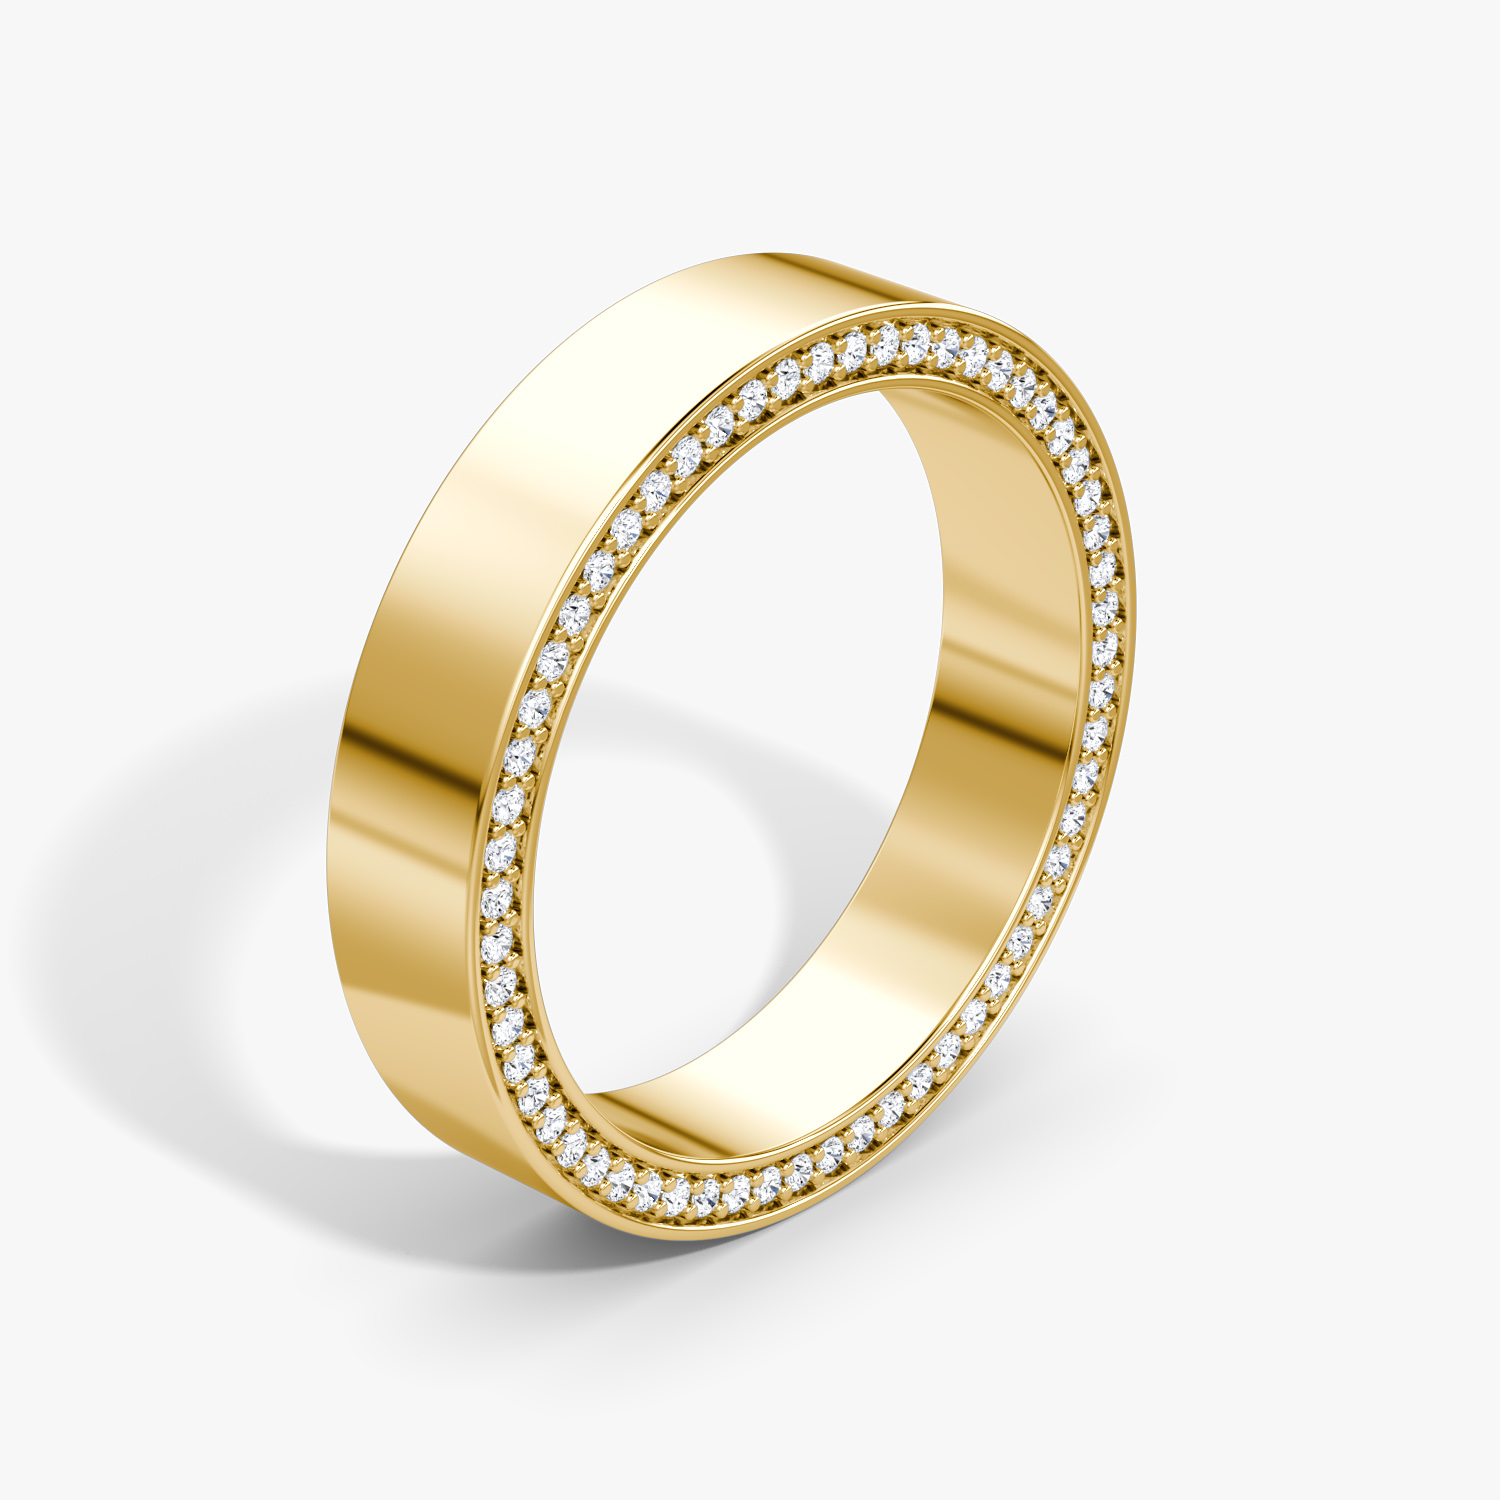 17,418 Wedding Rings Border Images, Stock Photos, 3D objects, & Vectors |  Shutterstock